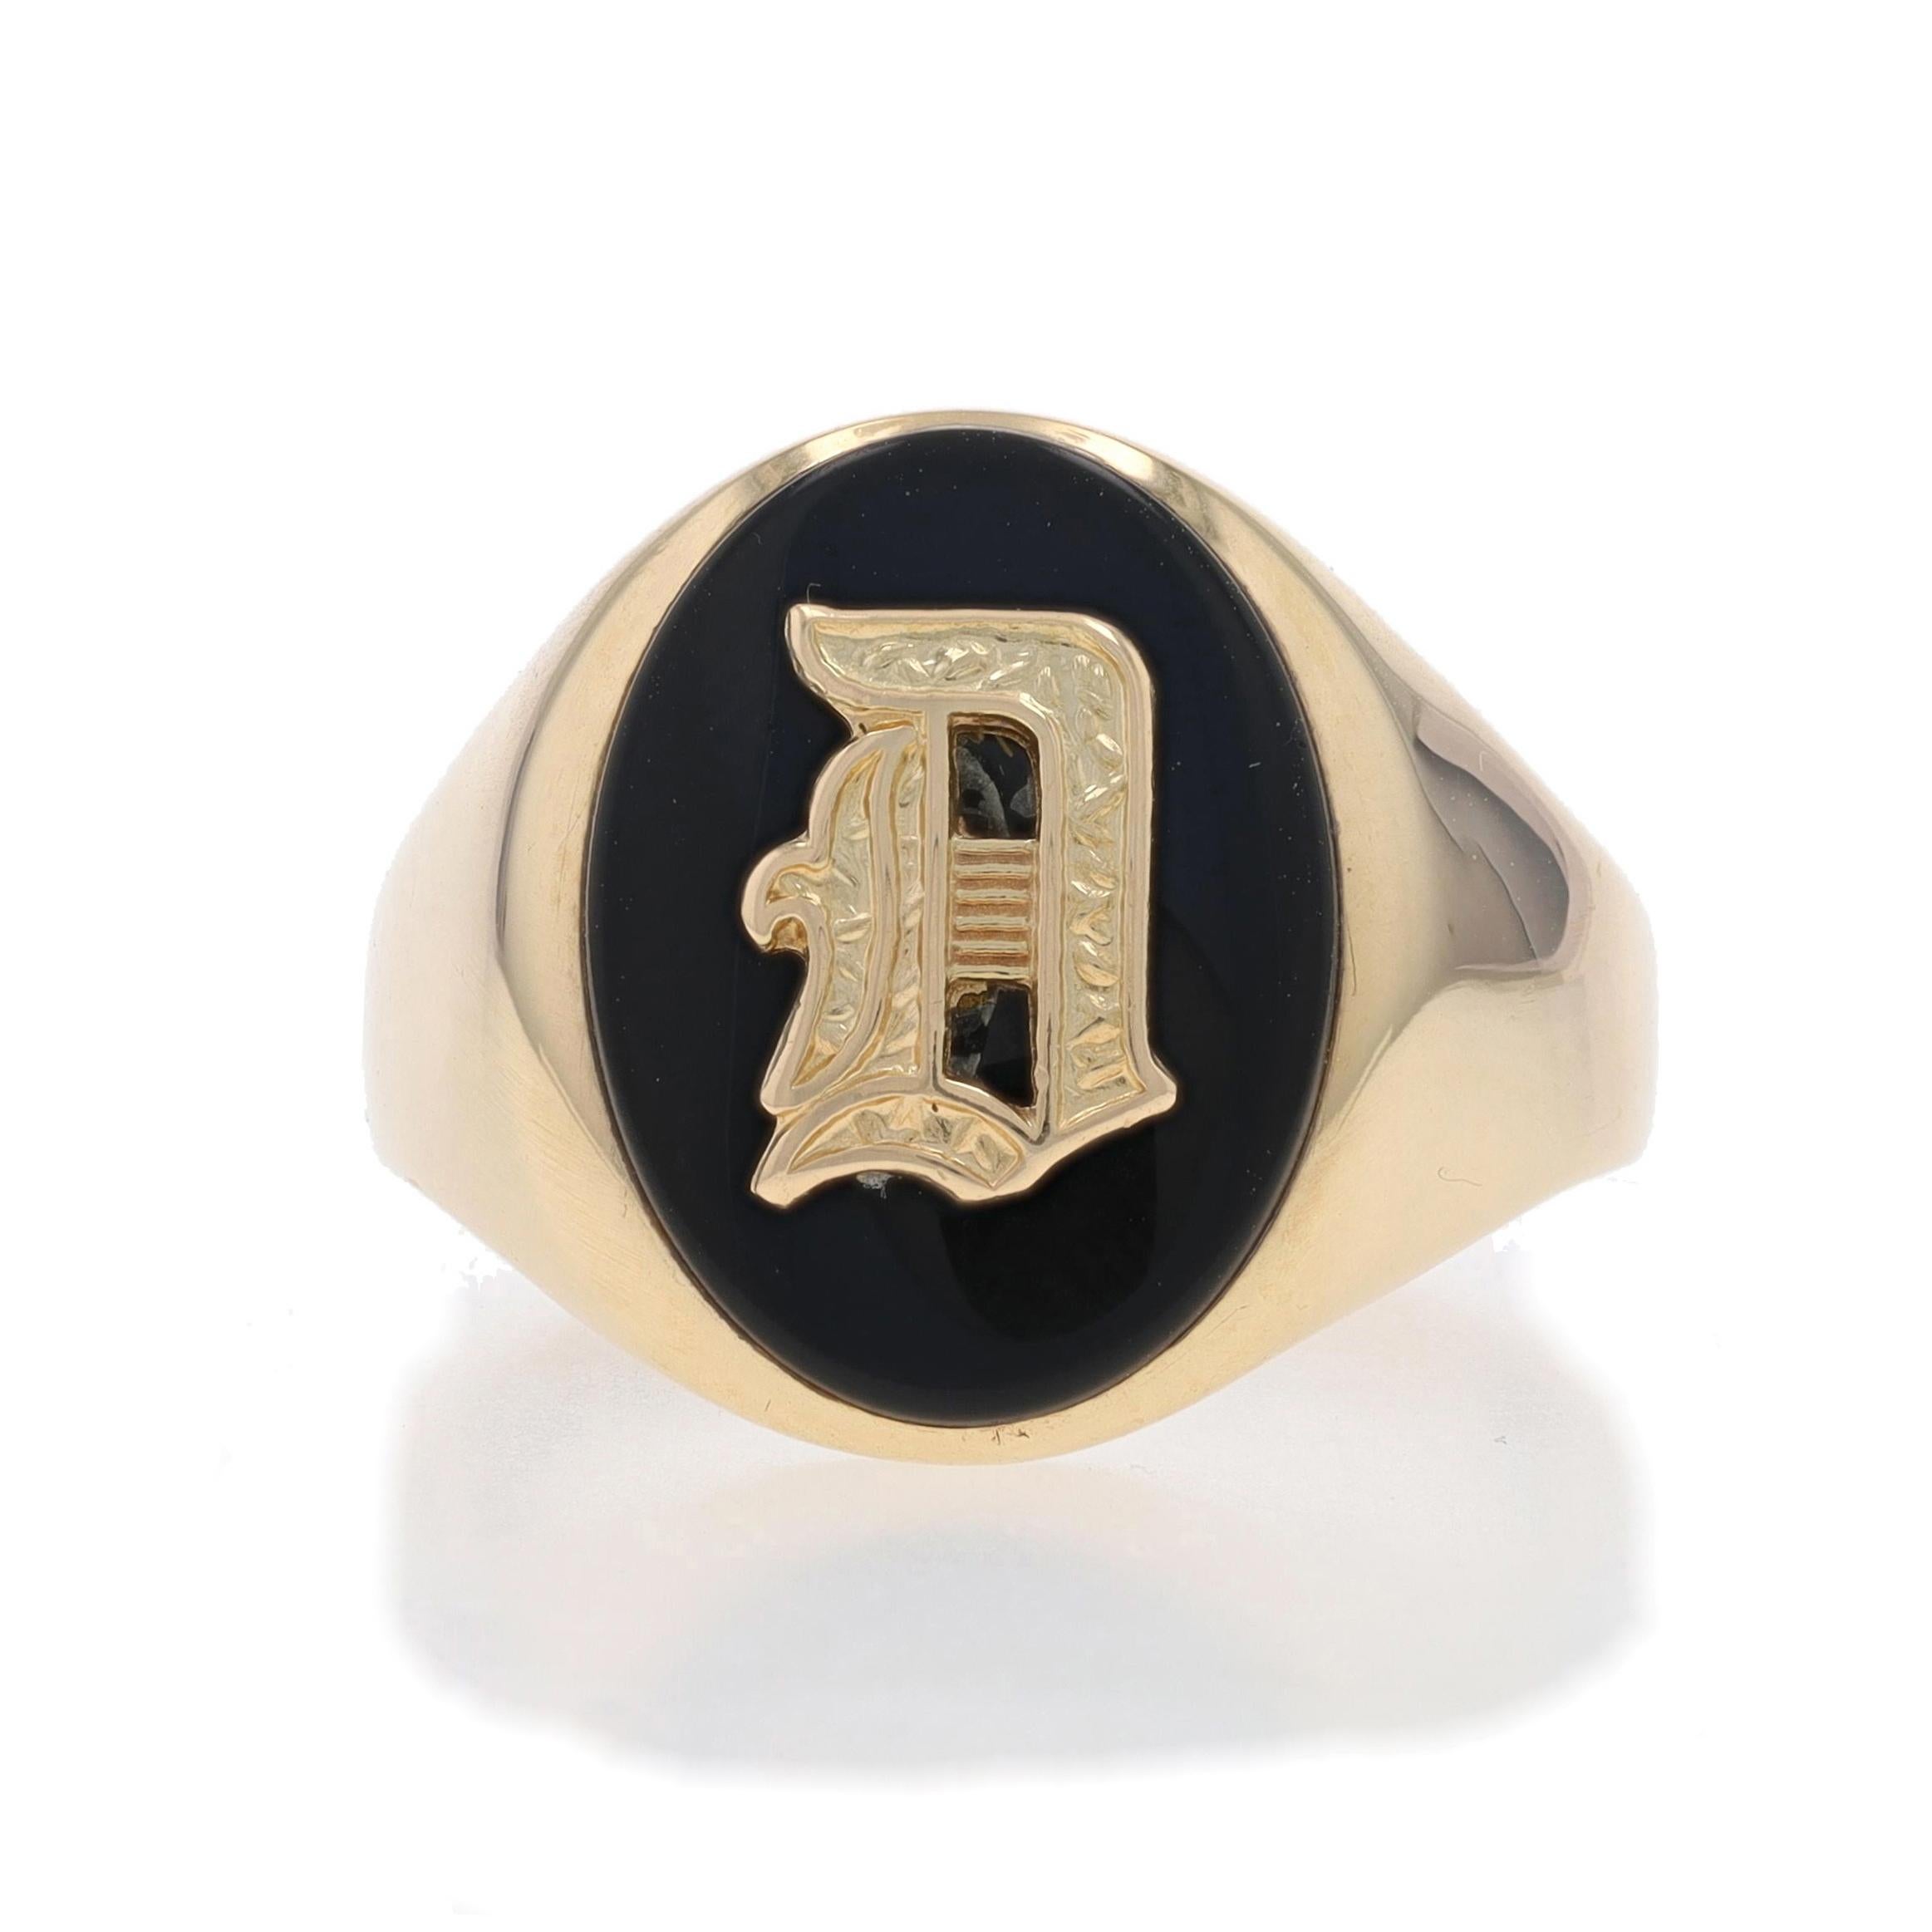 Size: 9
Sizing Fee: Up 1 1/2 sizes for $30 or Down 1 1/2 sizes for $30

Era: Vintage

Metal Content: 10k Yellow Gold

Stone Information

Natural Onyx
Color: Black

Style: Signet
Theme: Initial D, Monogram Letter

Measurements

Face Height (north to